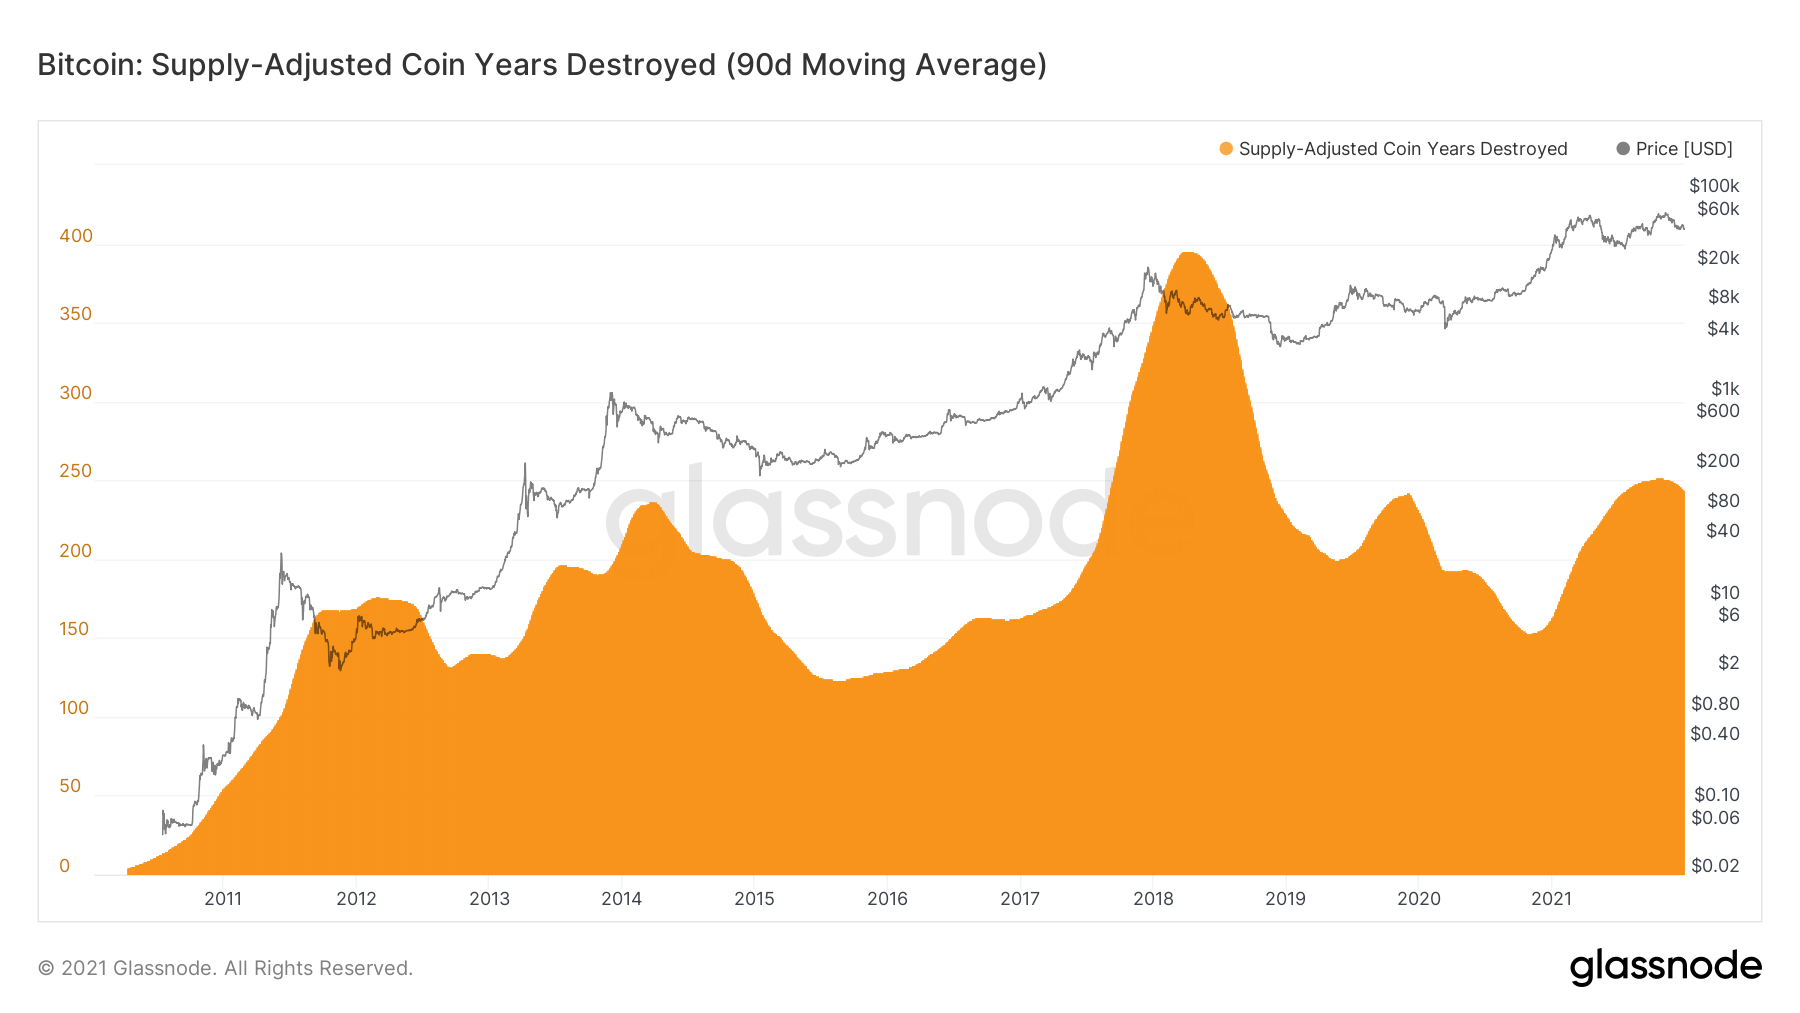 Bitcoin: Supply-Adjusted Coin Years Destroyed